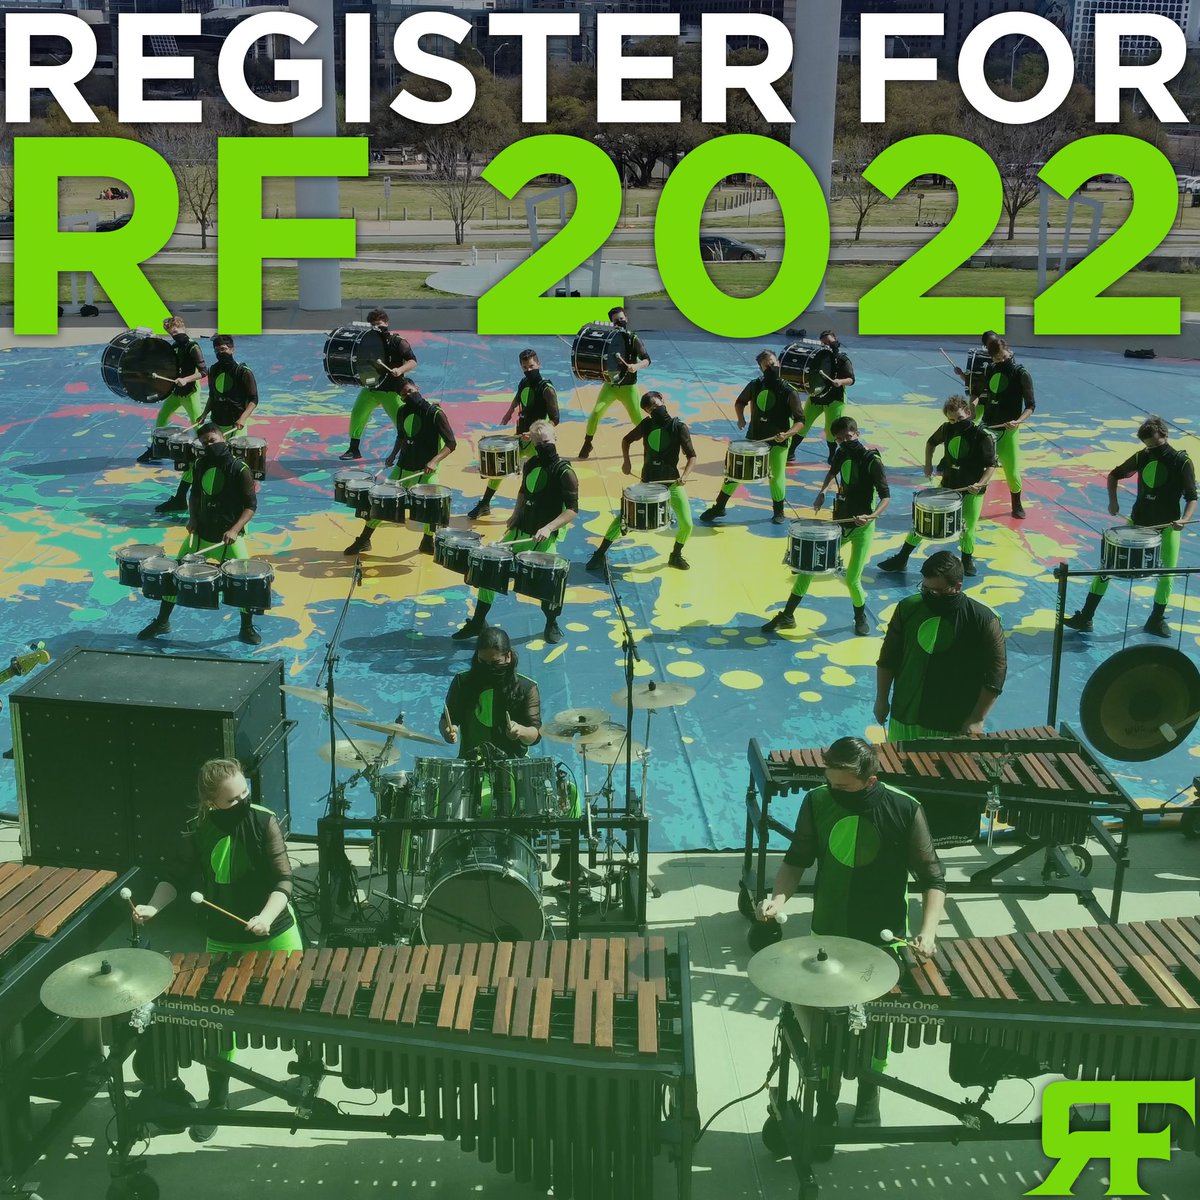 You can register NOW for RF 2022! Go to the 'Audition' tab on our website to see the details and begin your journey to joining RF 2022!

#RF2022 #WGI2022 #evansdrumheads #daddario #MarimbaOne #M1Force #WGI #percussion #drums #innovativepercussion #udbfamily